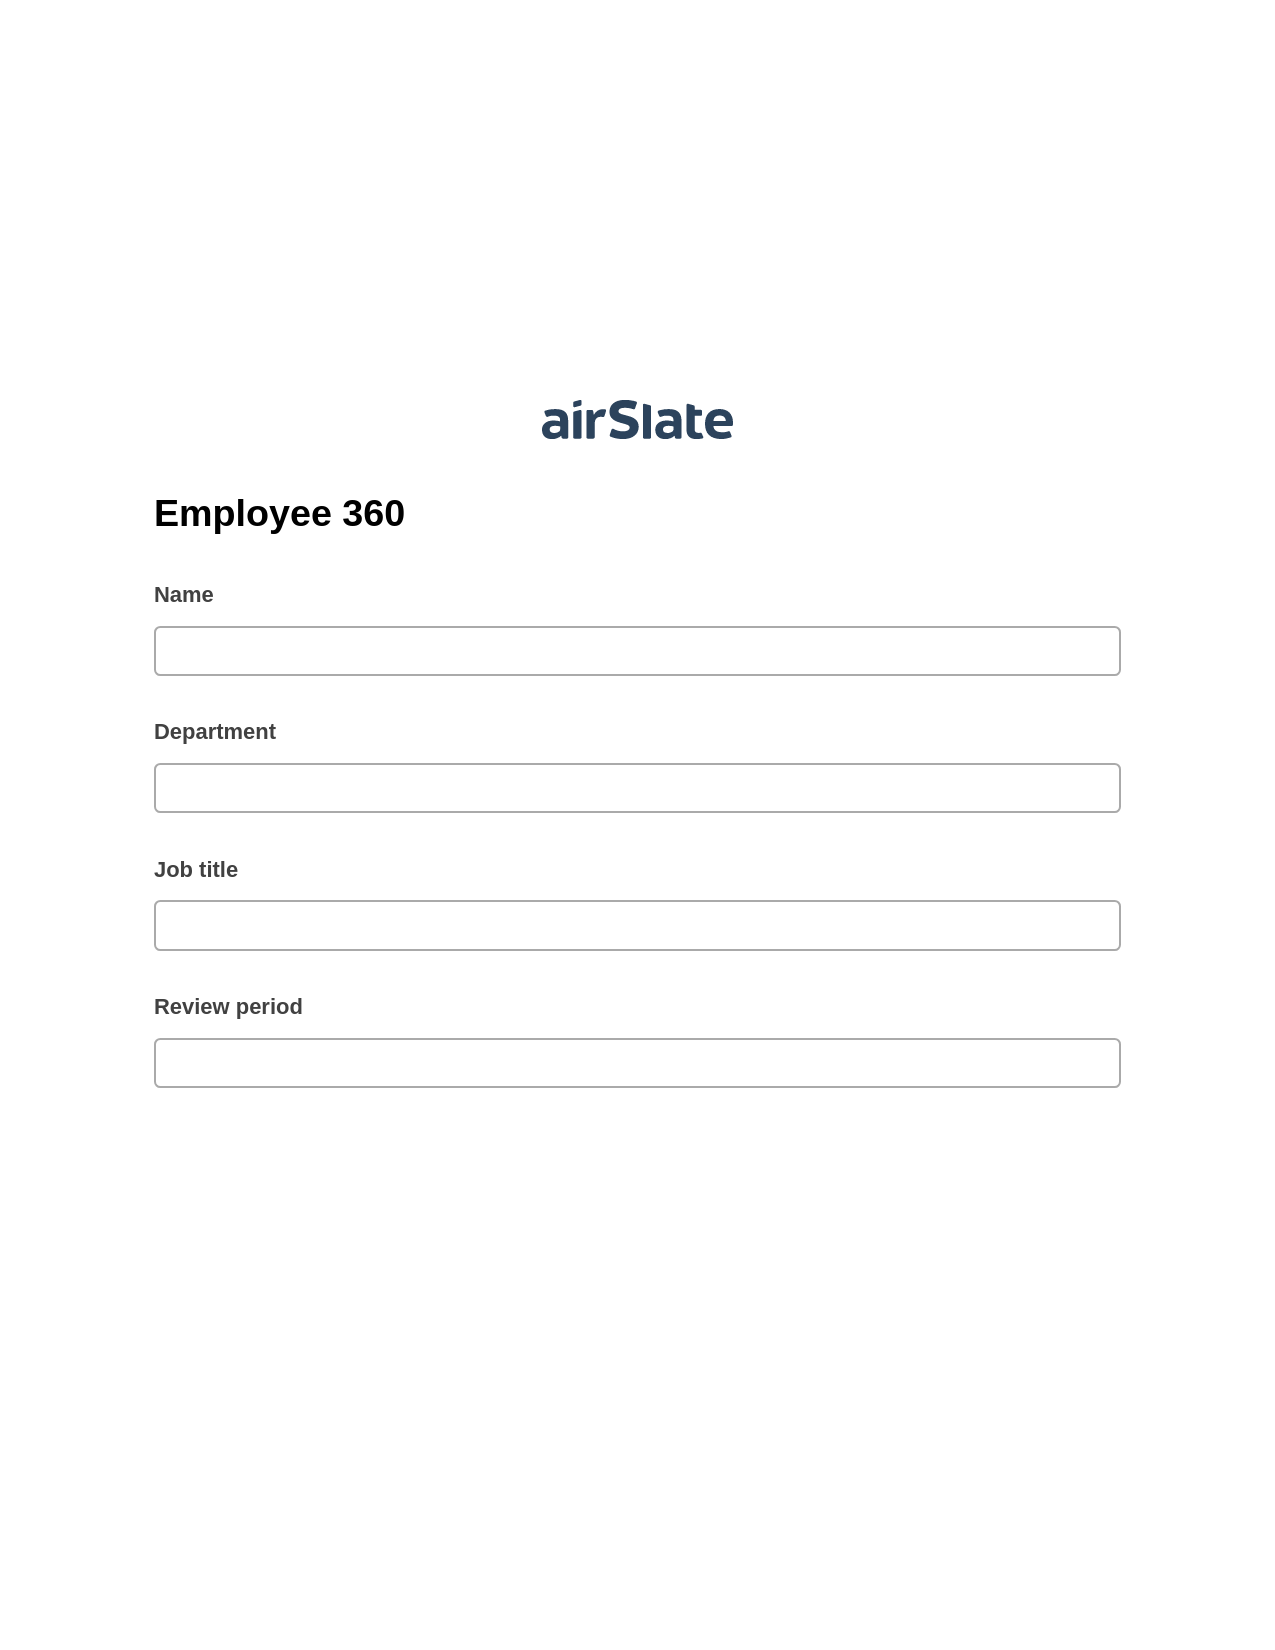 Employee 360 Pre-fill Dropdowns from CSV file Bot, Update MS Dynamics 365 Record Bot, Export to Excel 365 Bot